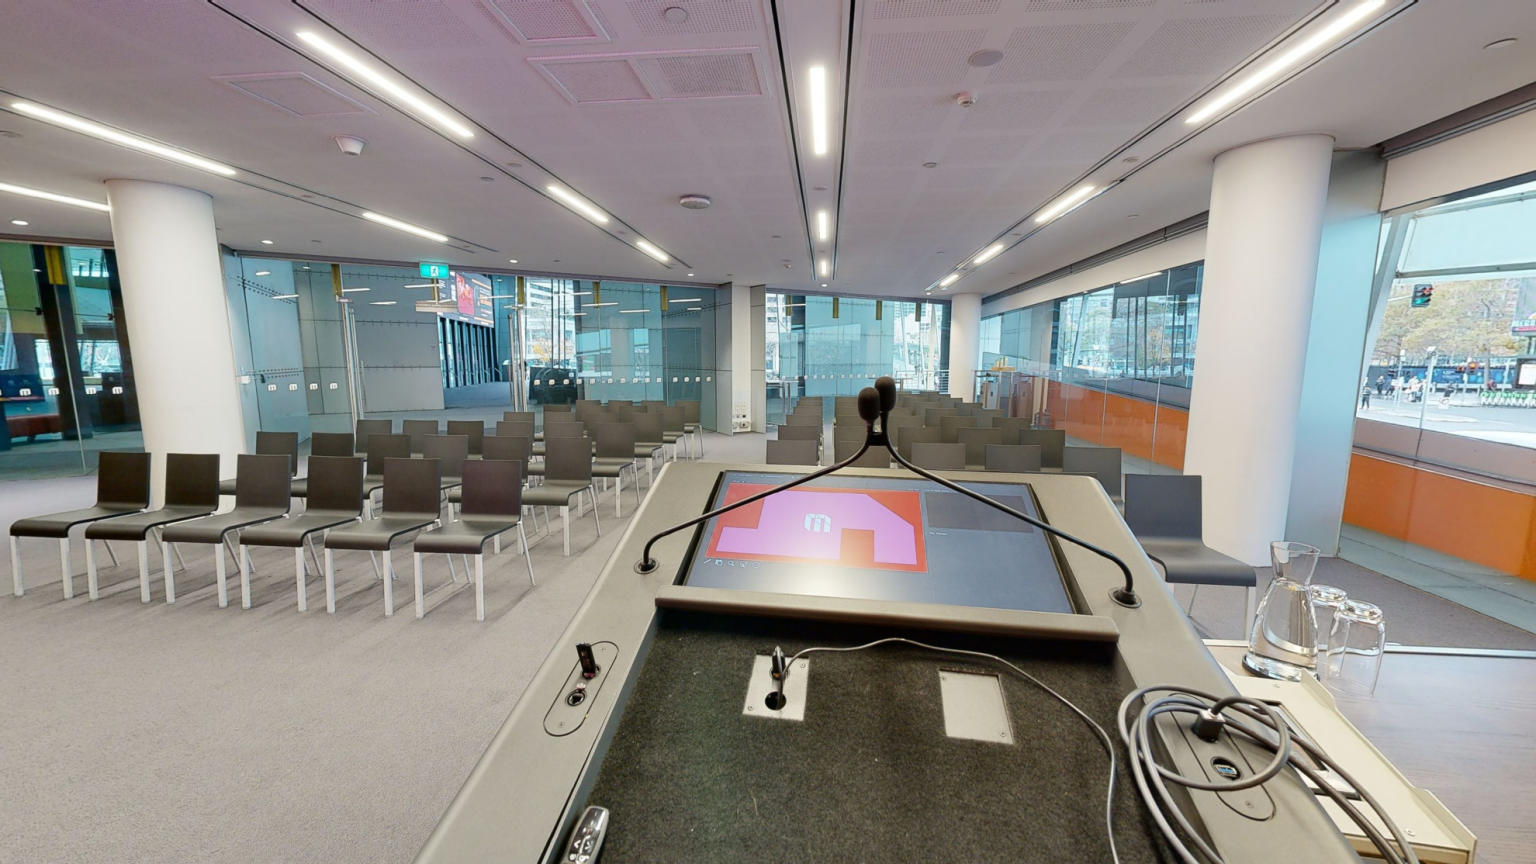 A conference or meeting room featuring rows of chairs arranged to face large tv screen for presentations and discussions. A lectern sits to the side of the tv screen and windows run along the side of the room facing out towards Crown. 